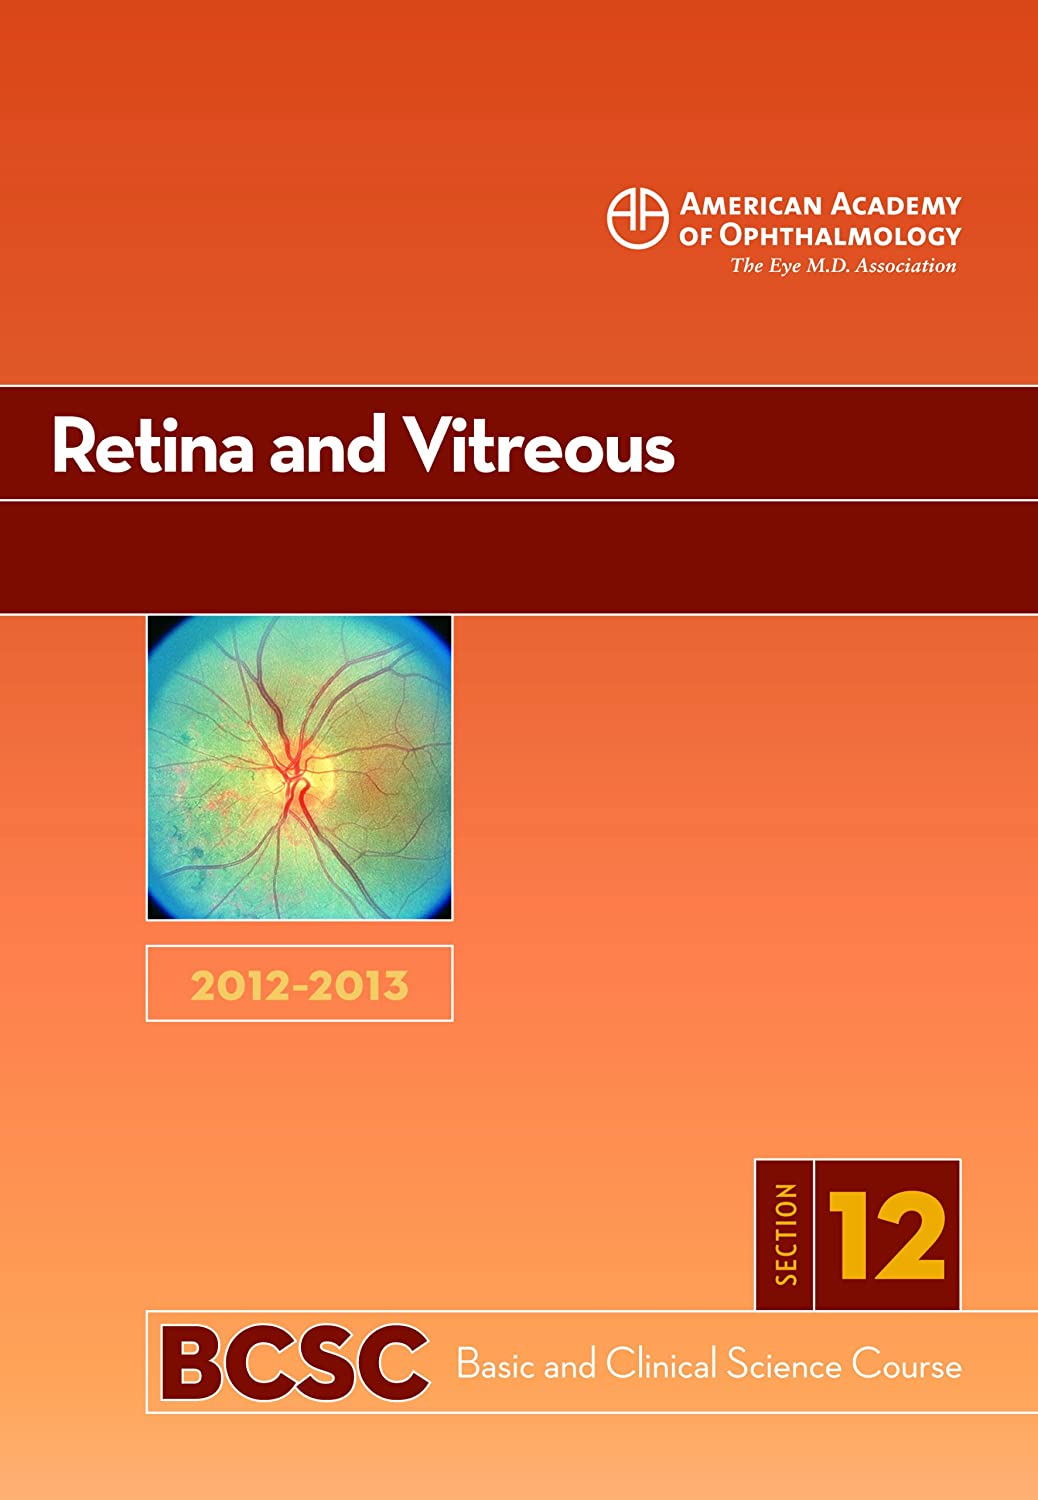 2012-2013 Basic and Clinical Science Course, Section 12: Retina and Vitreous